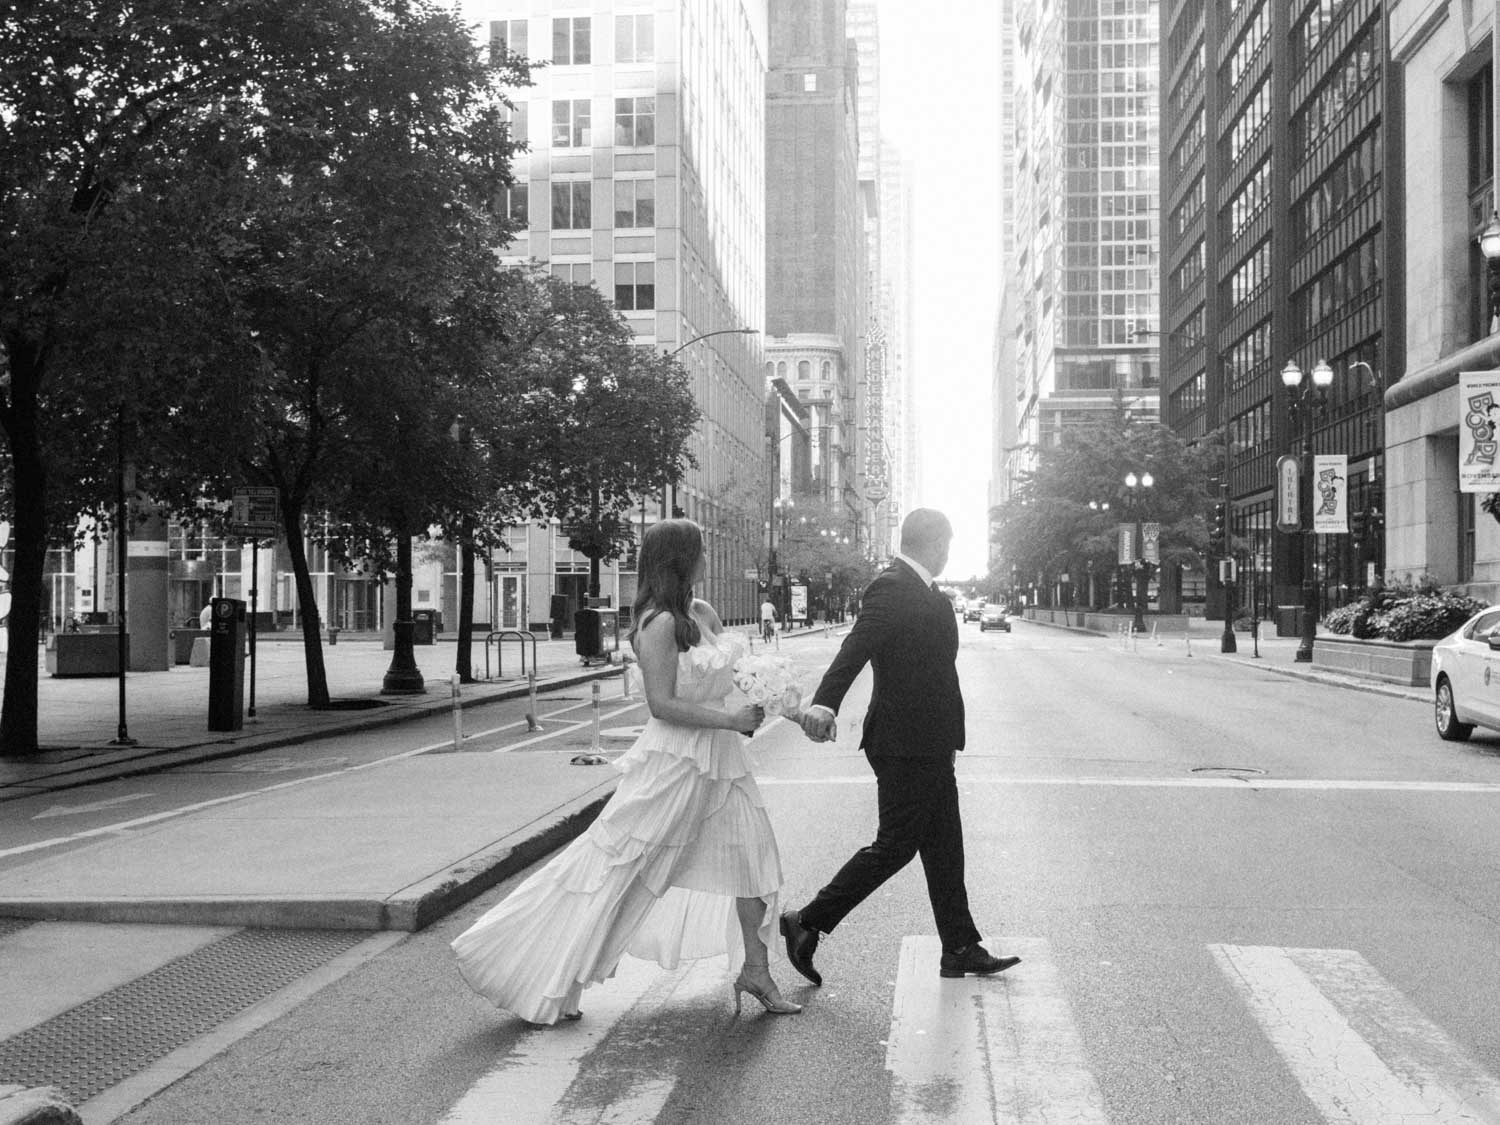 A classic black and white wedding photo taken in downtown Chicago